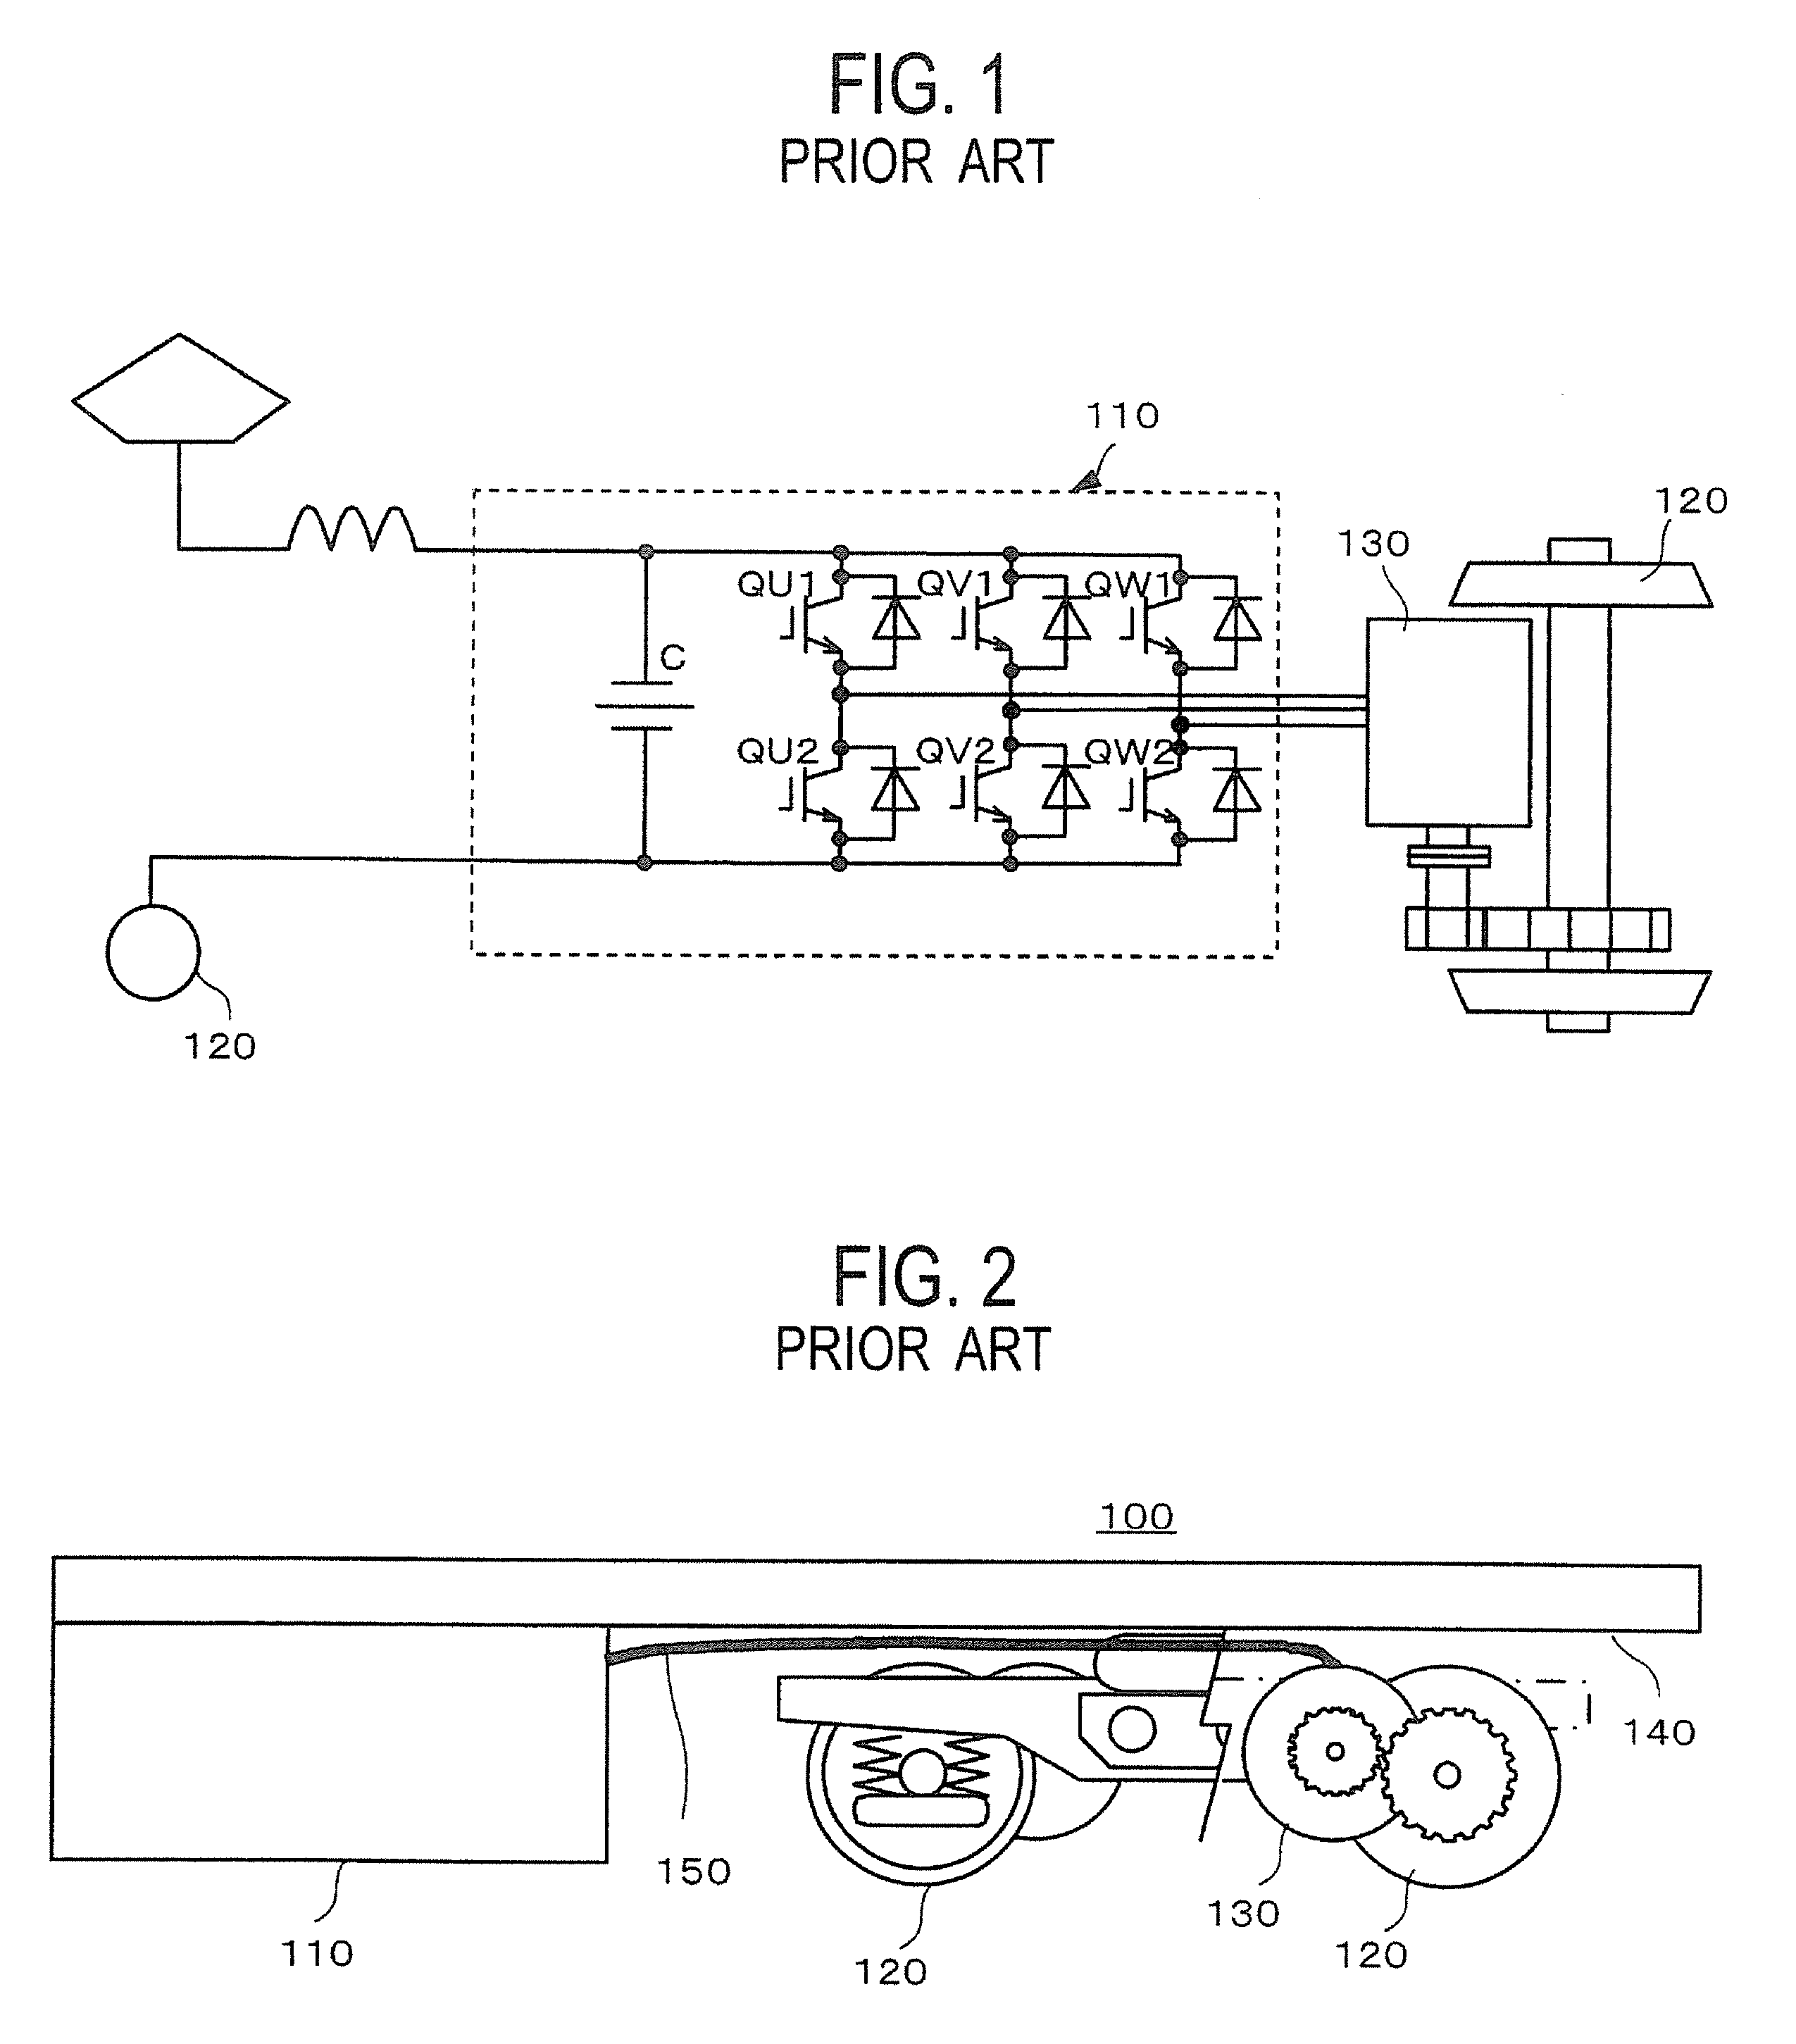 Motor drive system for railway vehicle